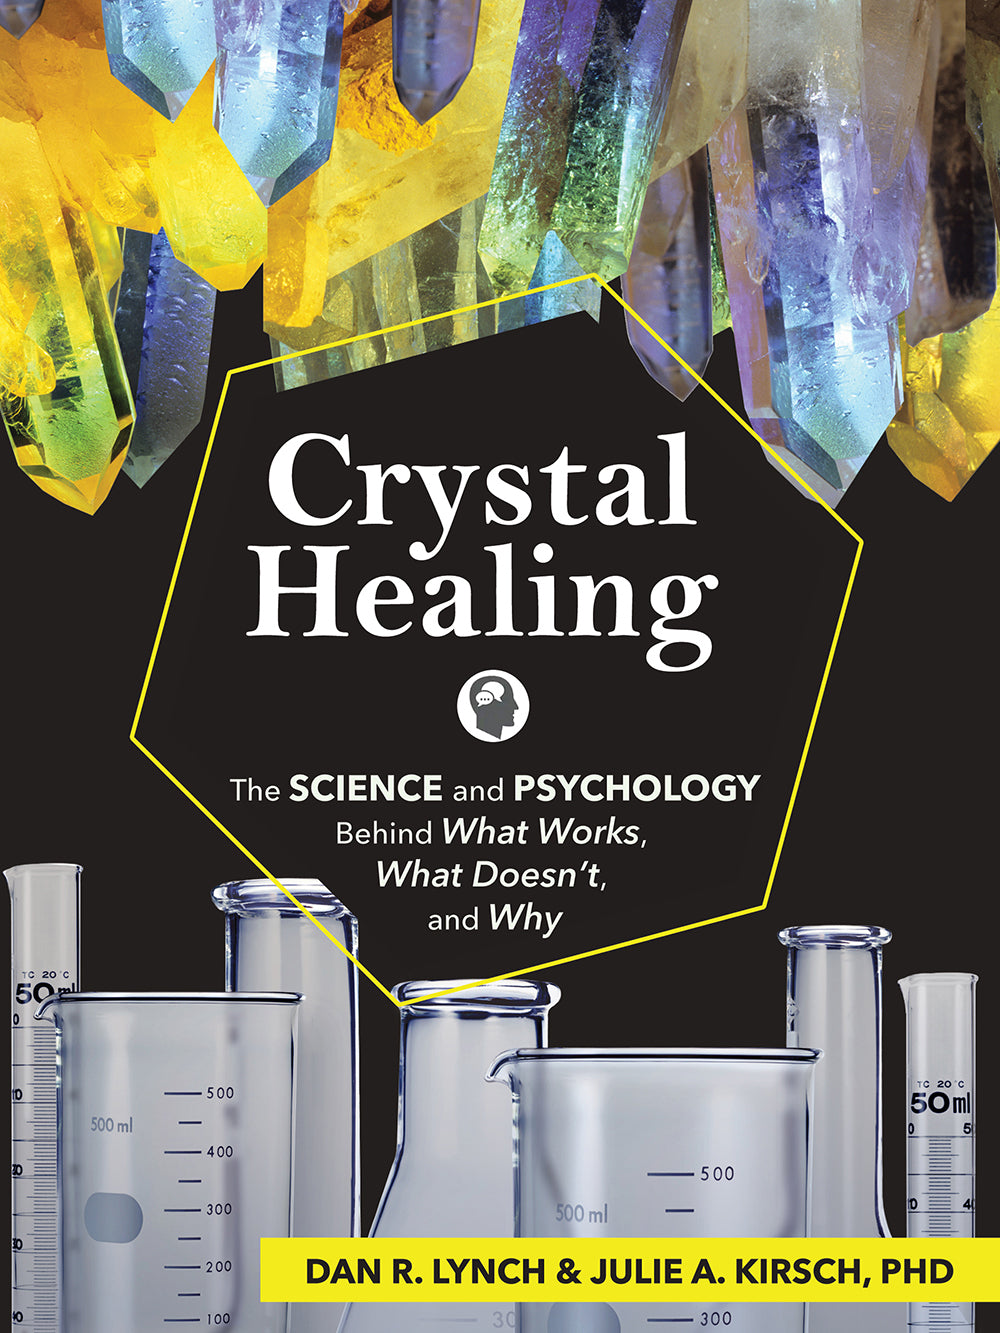 Crystal Healing: The Science & Psychology Behind What Works, What Doesn't, and Why